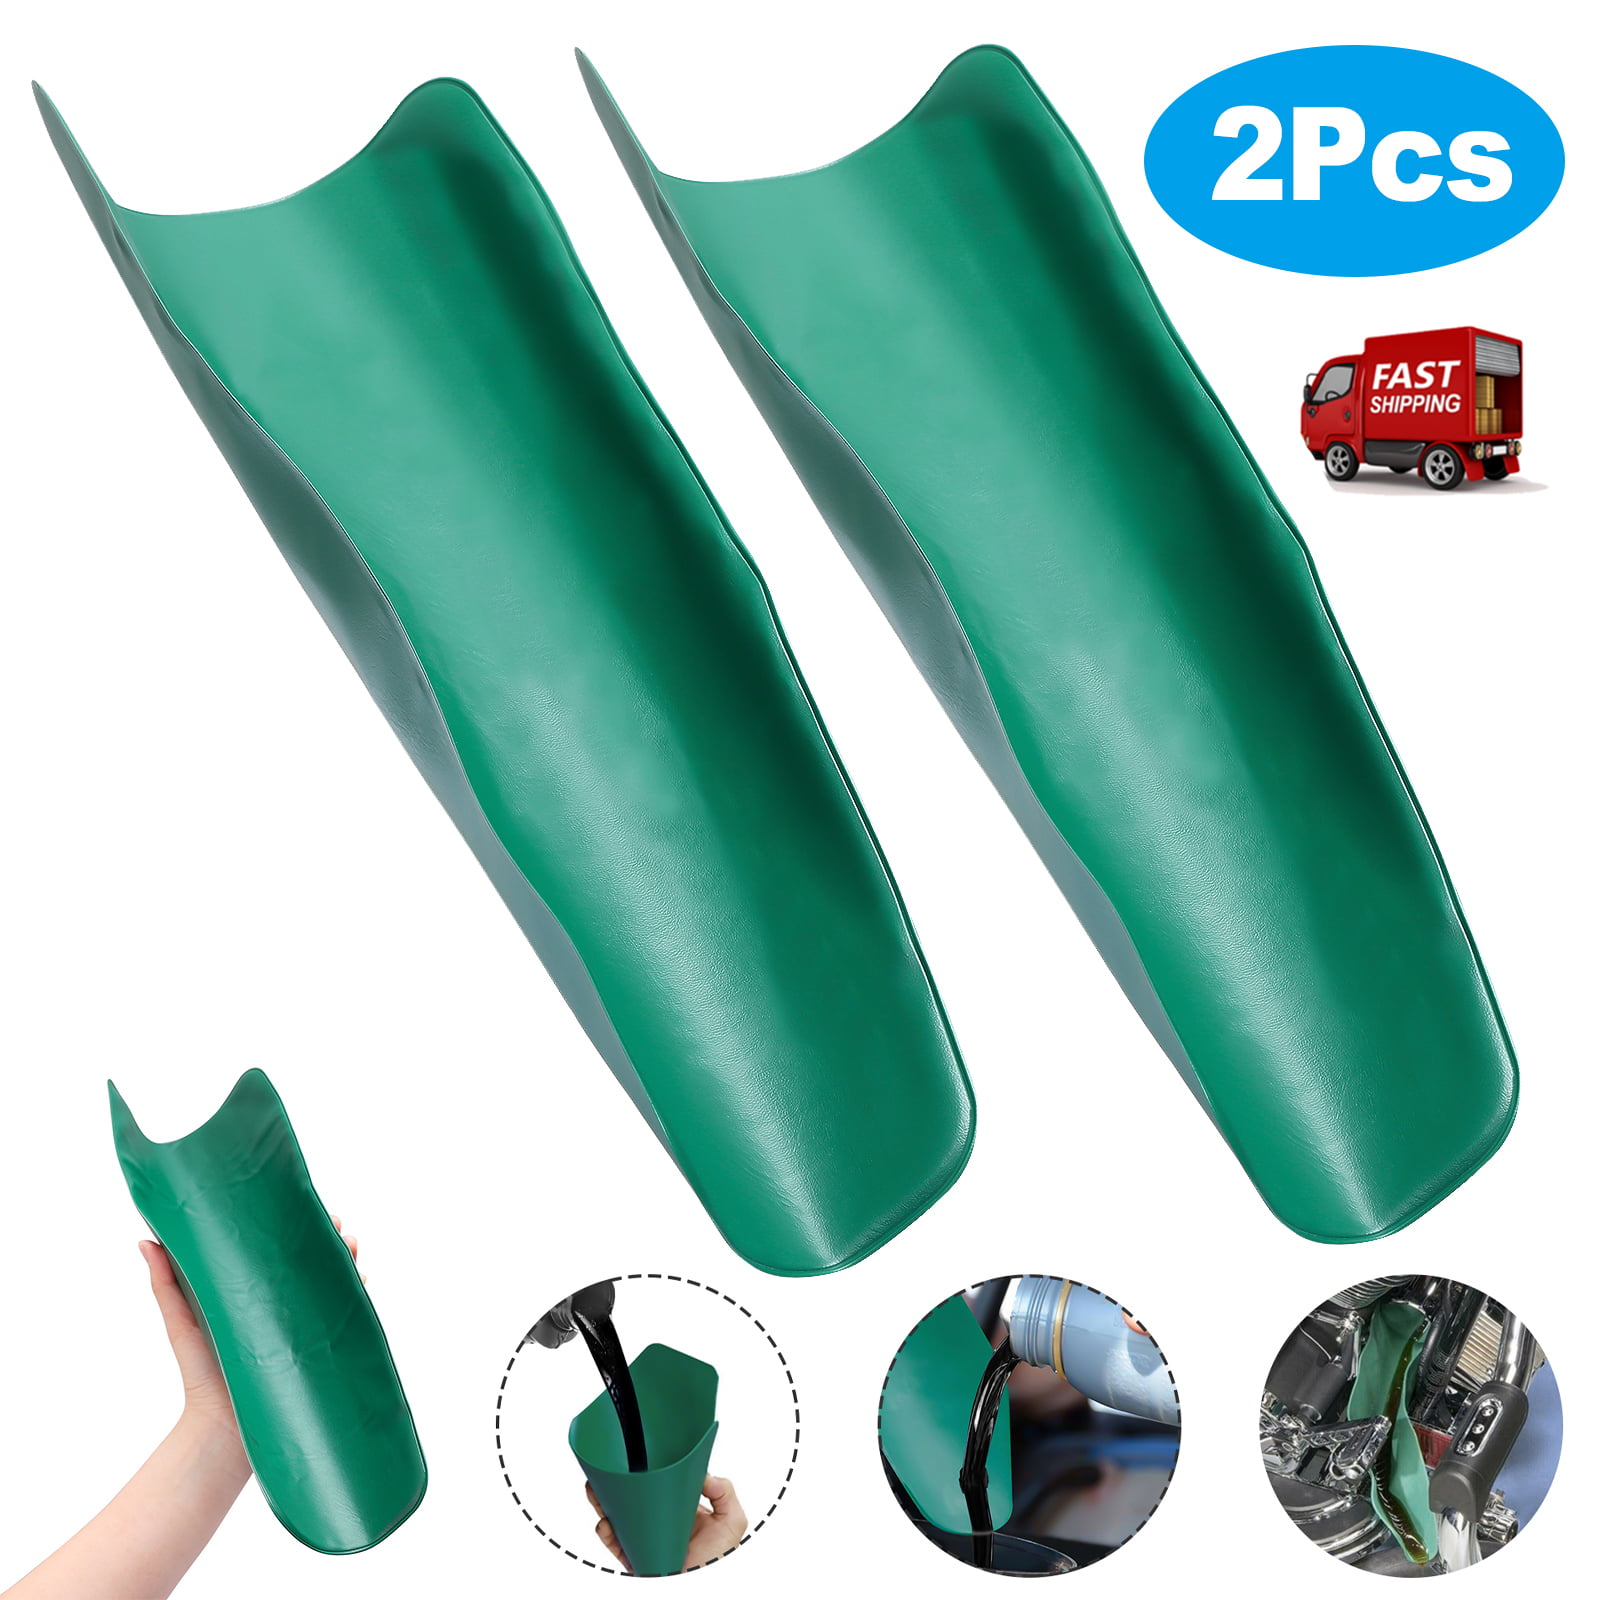 Lawn Equipment Motorcycles Foldable Flexible Free Oil Filter Funnel Flexible Draining Tool Oil Funnel Draining Tool Oil Guide Plate Automobiles Reusable Draining Filter Funnel Tool for Trucks 